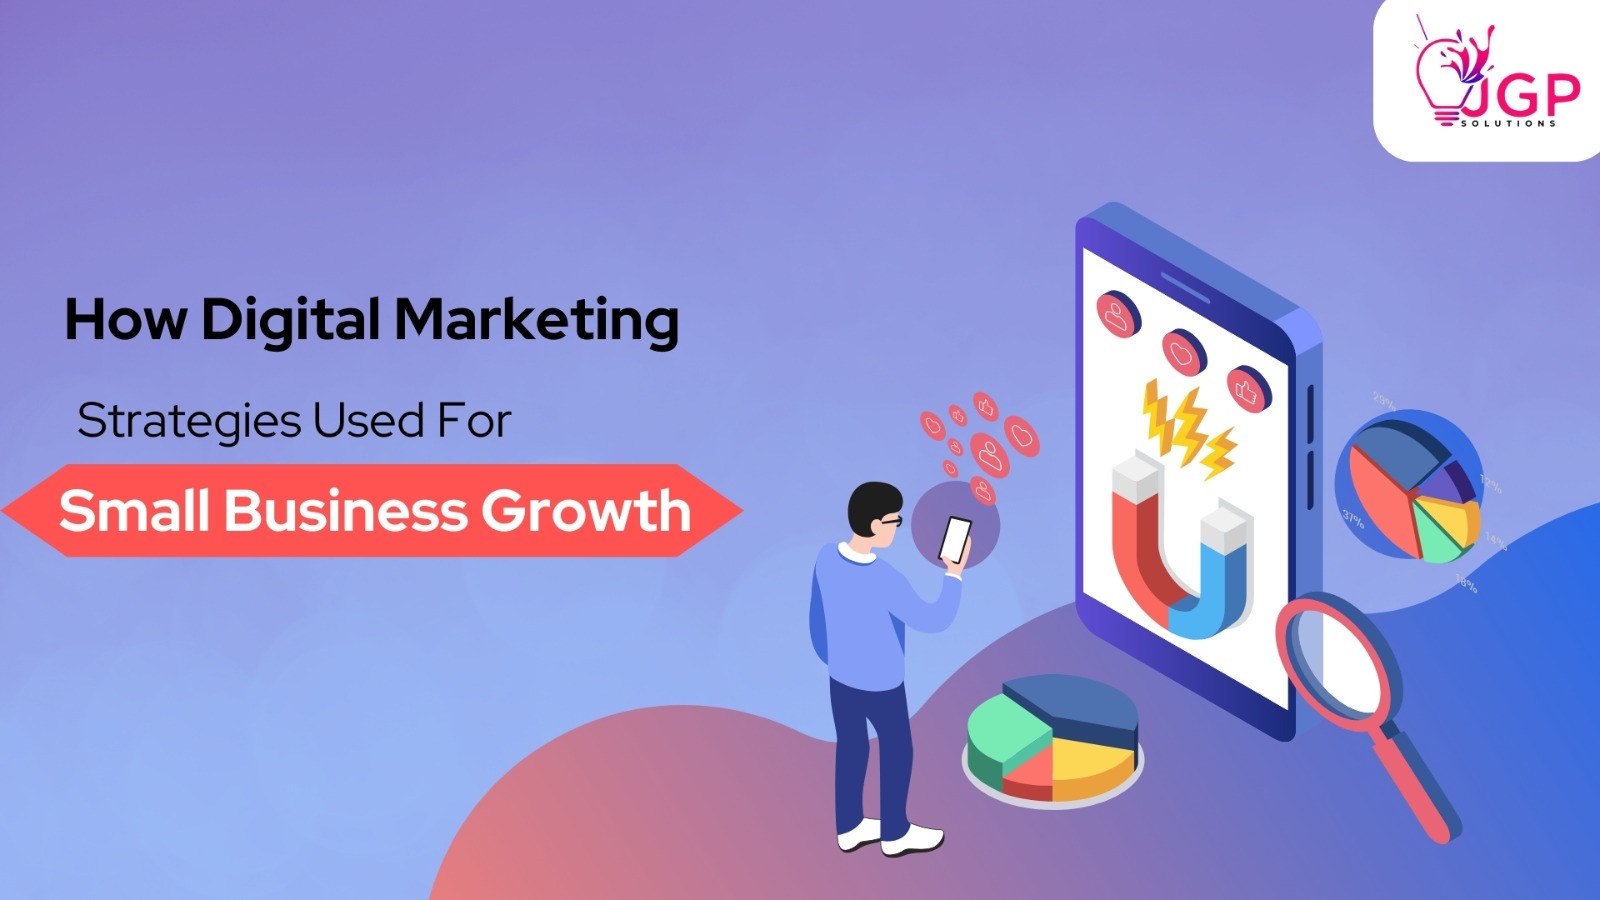 How Digital Marketing Strategies Used For Small Business Growth